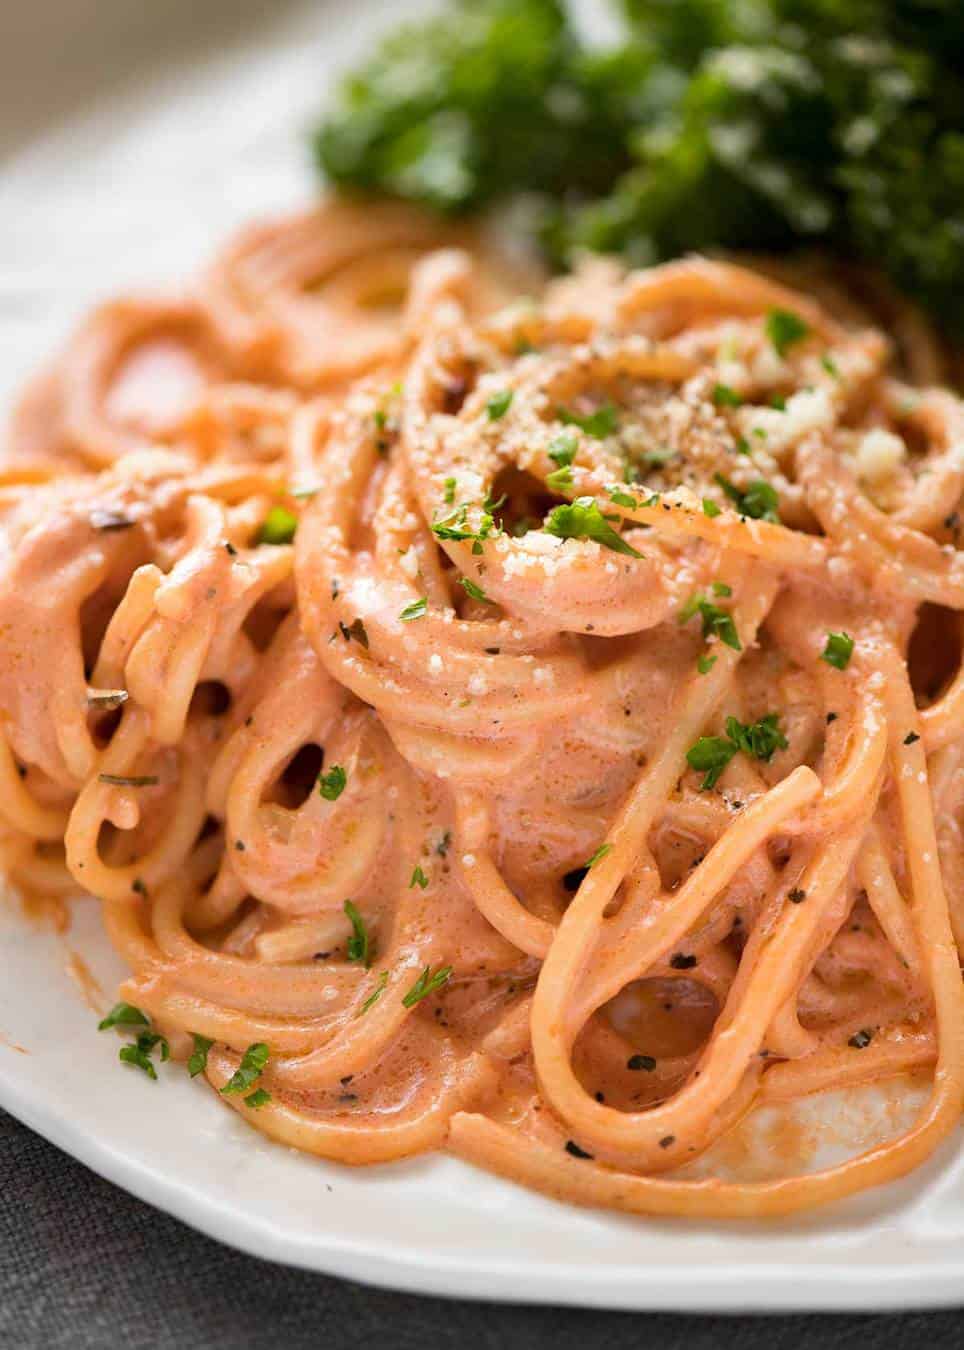 Creamy tomato pasta on a plate with marinated kale salad.